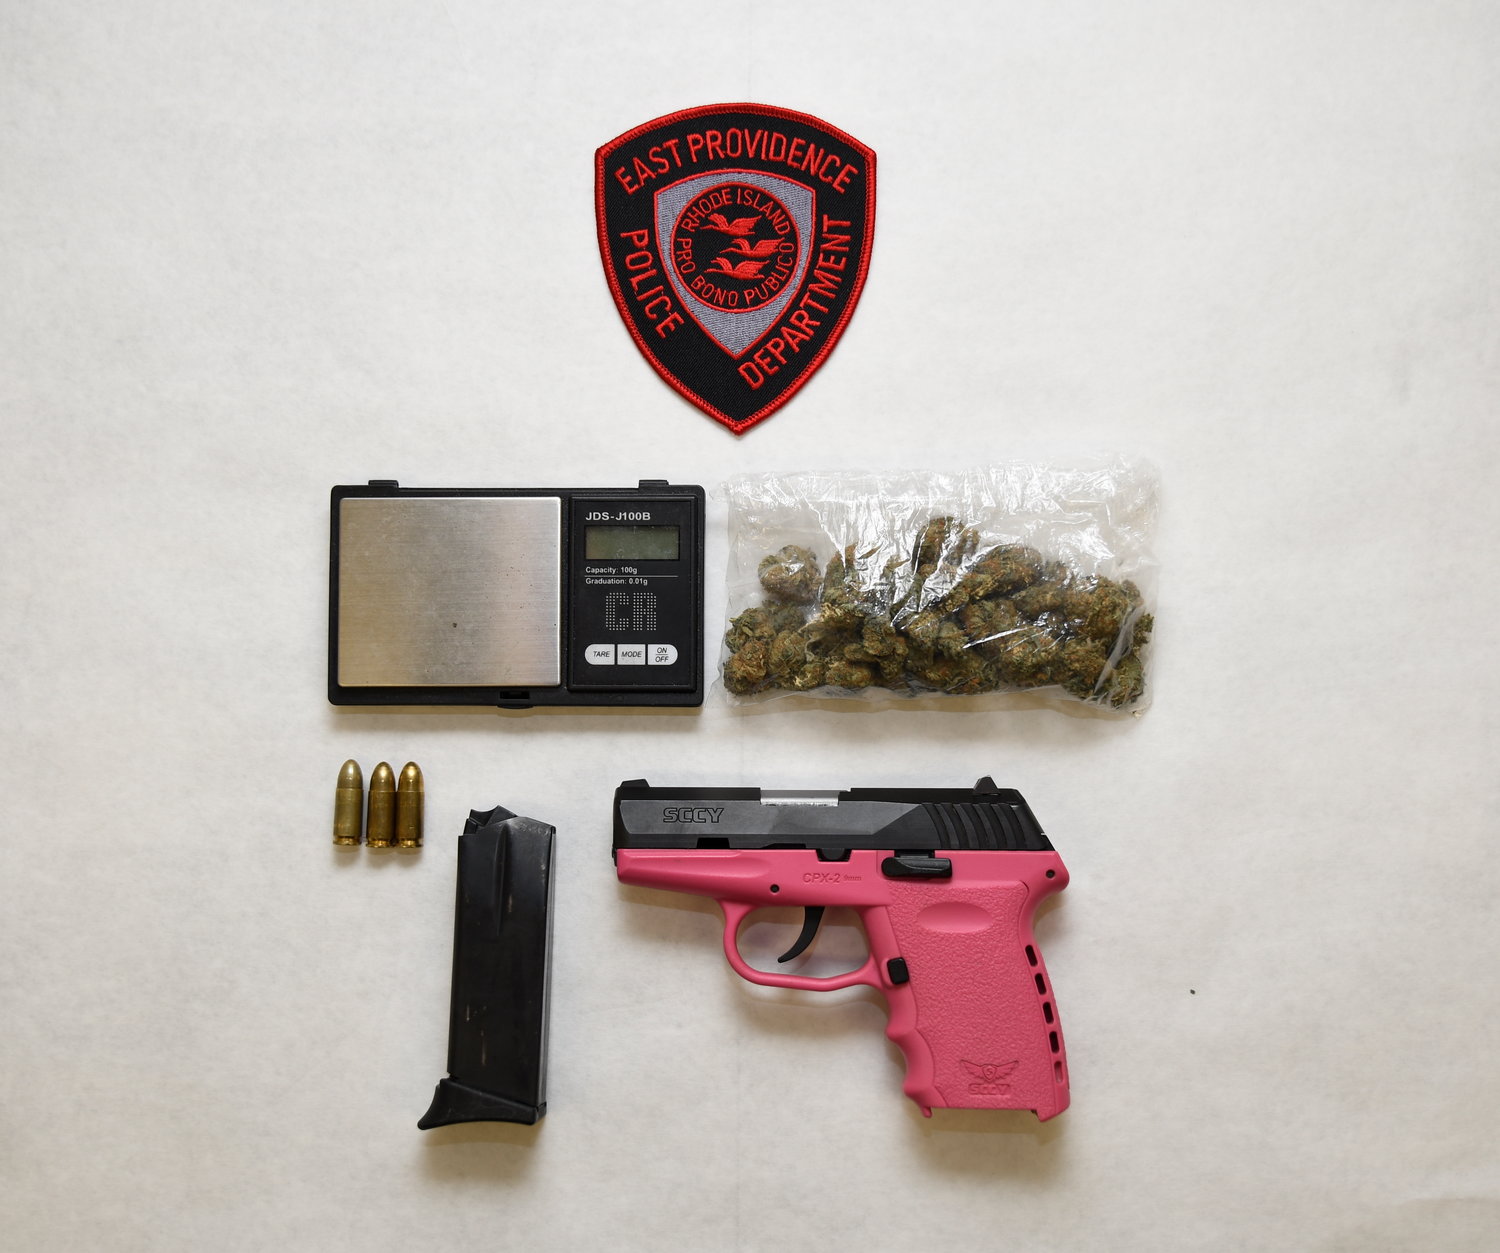 Contraband confiscated by the EPPD from Mr. Luna.